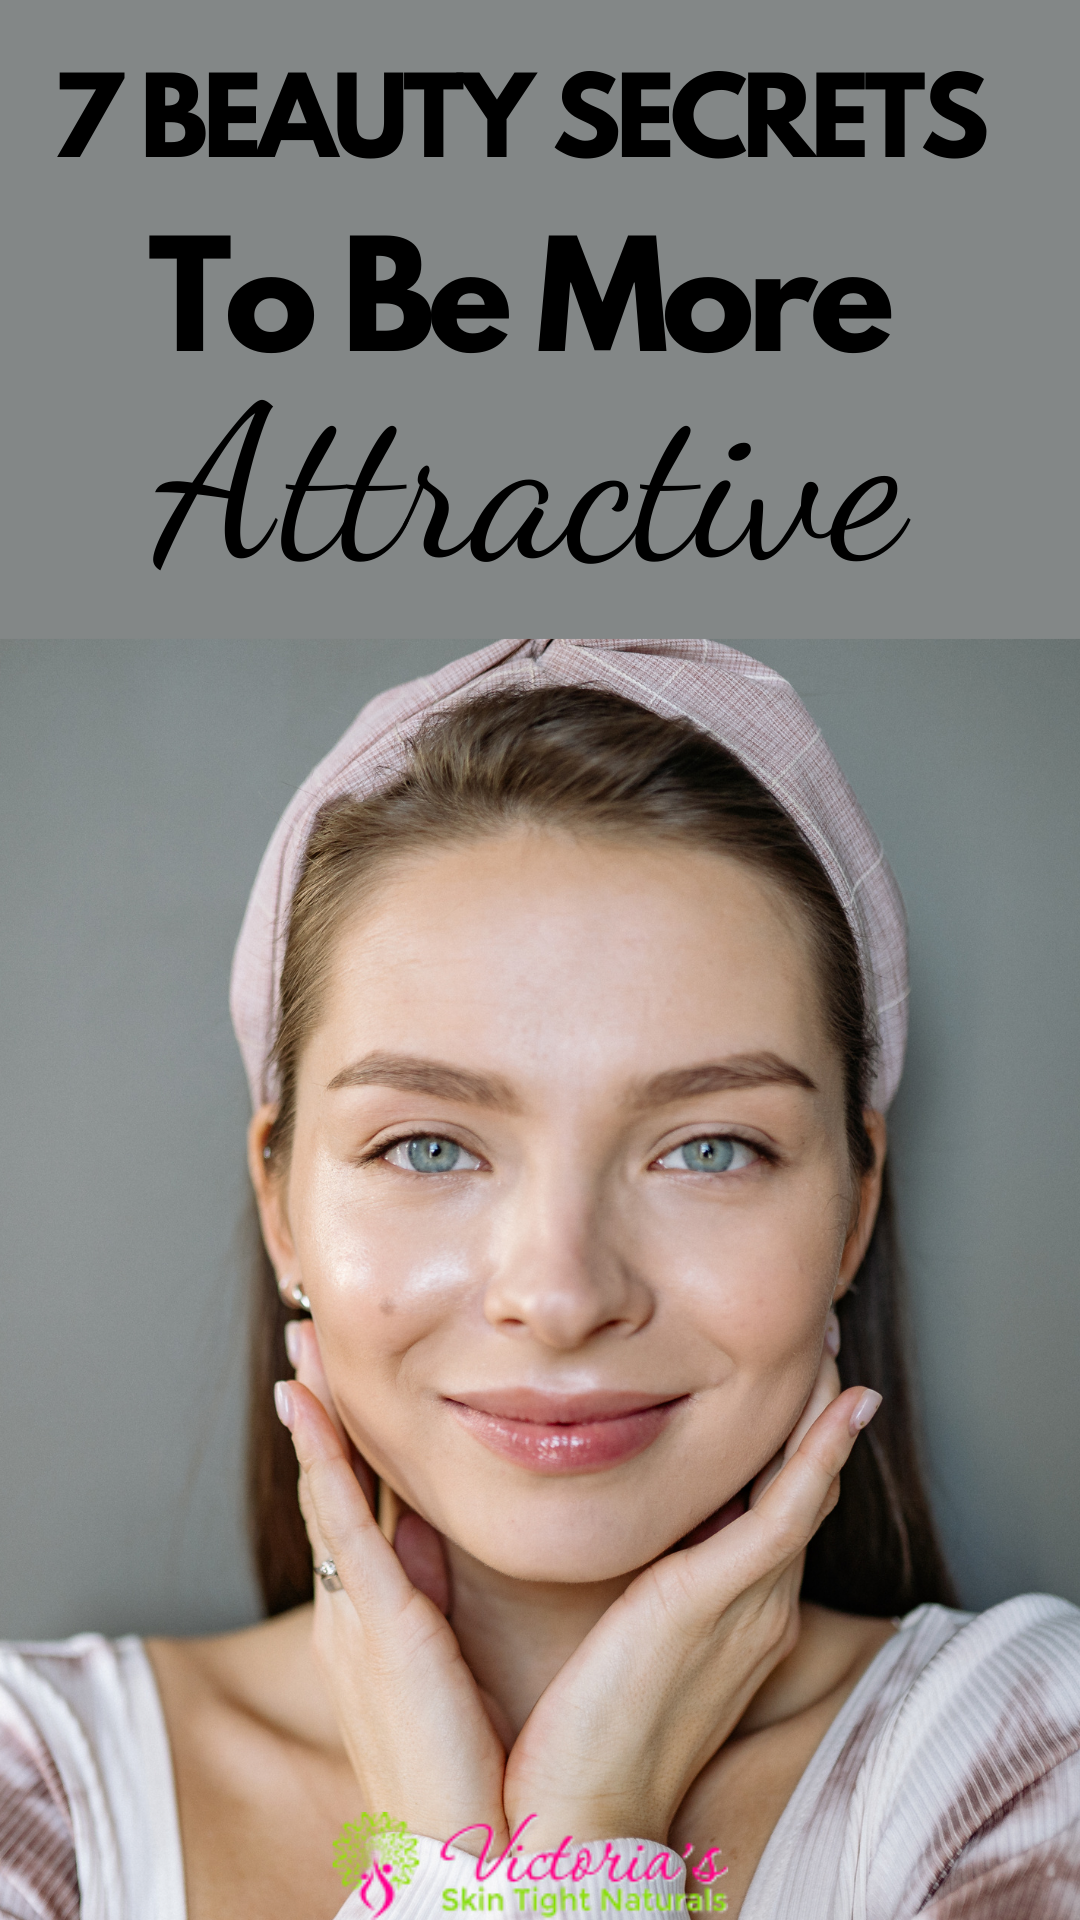 7 Beauty Tips For Looking Younger